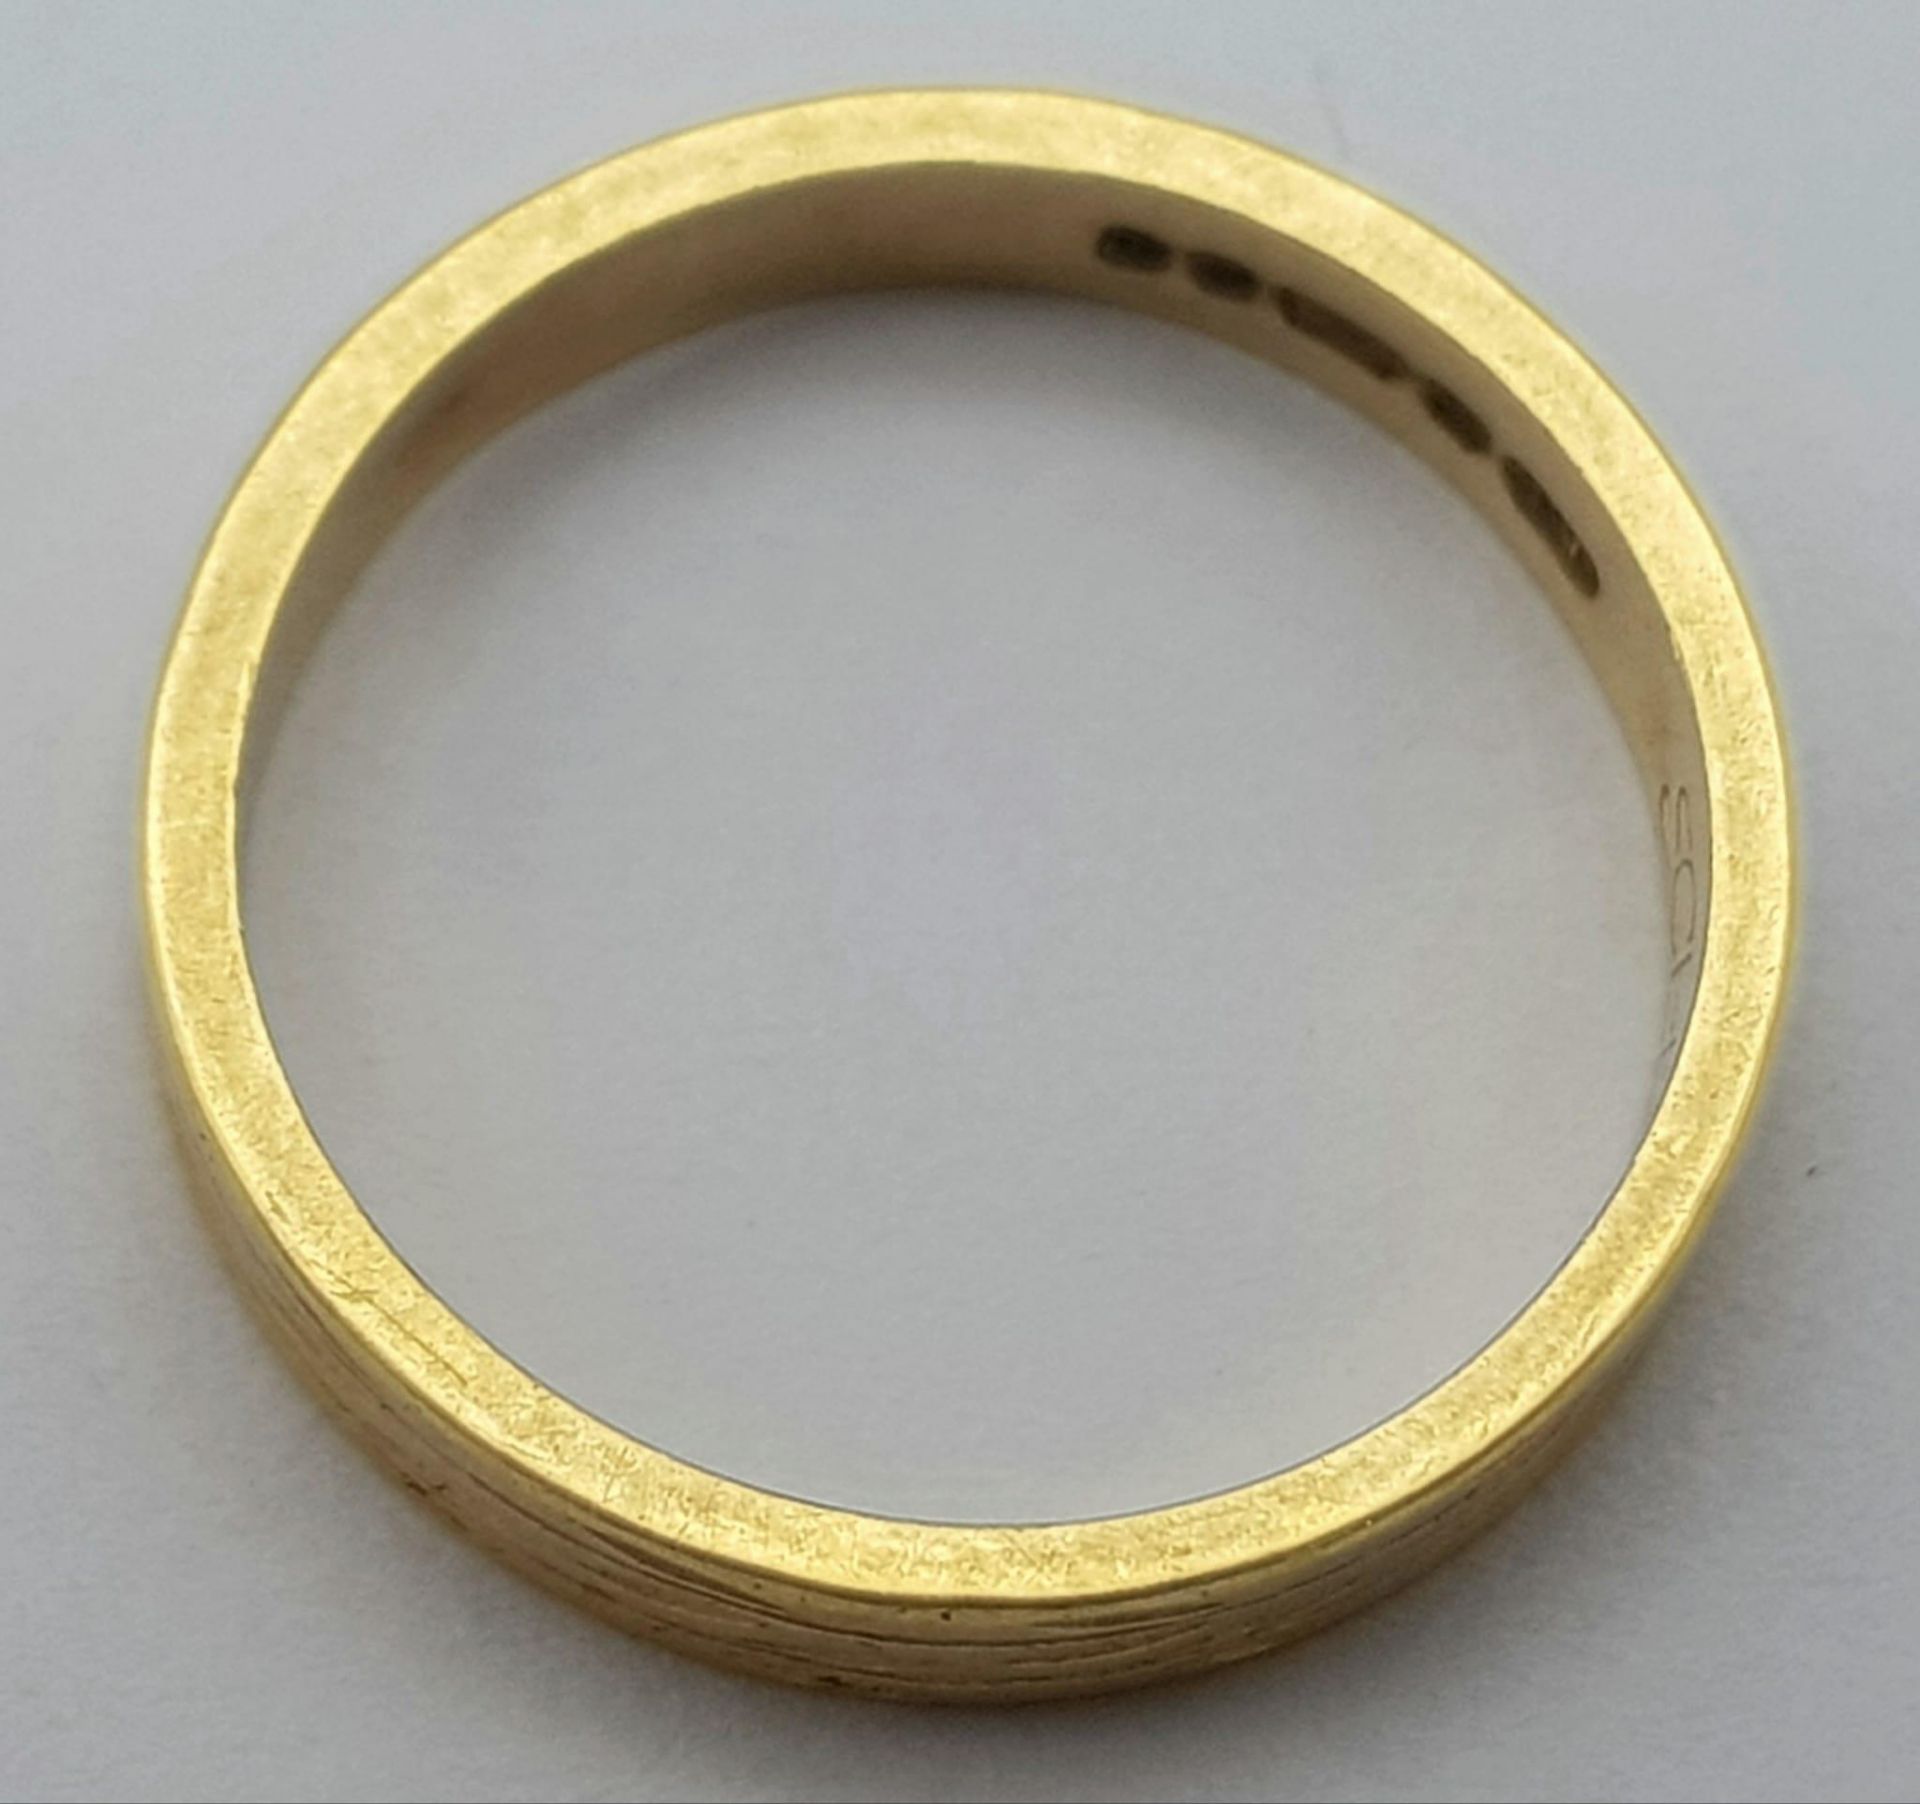 An 18K Yellow Gold Band Ring. 3mm width. Size H. 2.4g weight. - Image 4 of 5